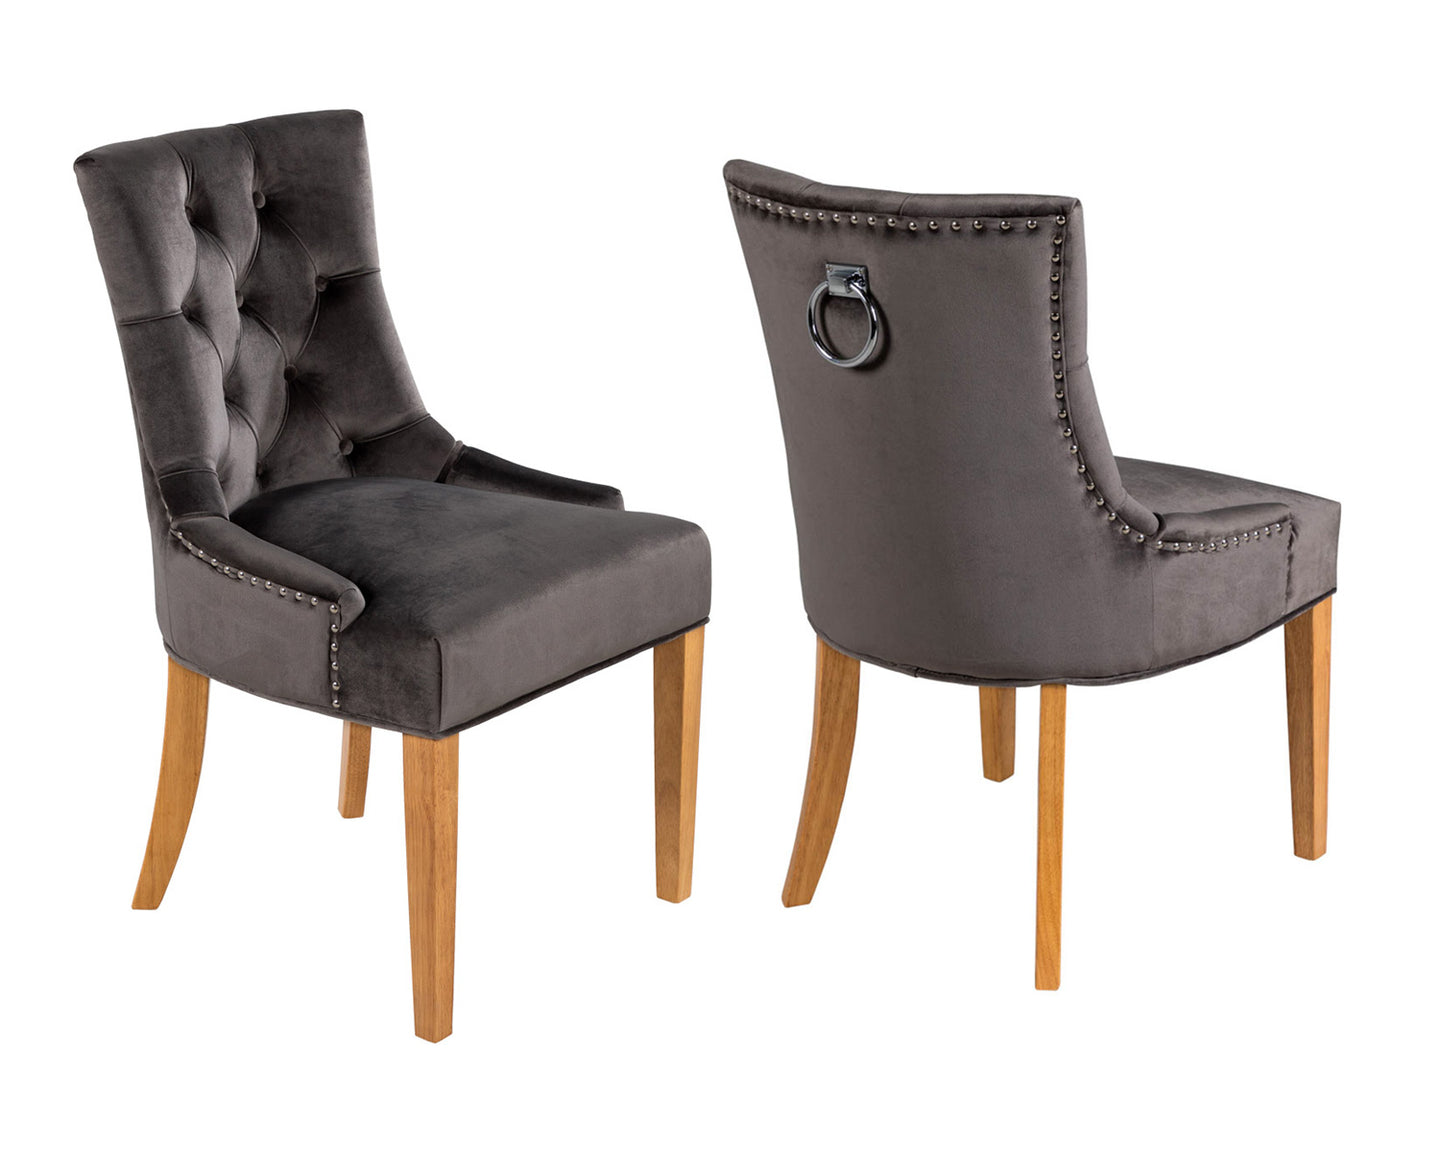 Pair of Scoop Back Verona Dining Chairs in Grey Velvet with Chrome Knocker and Oak Legs